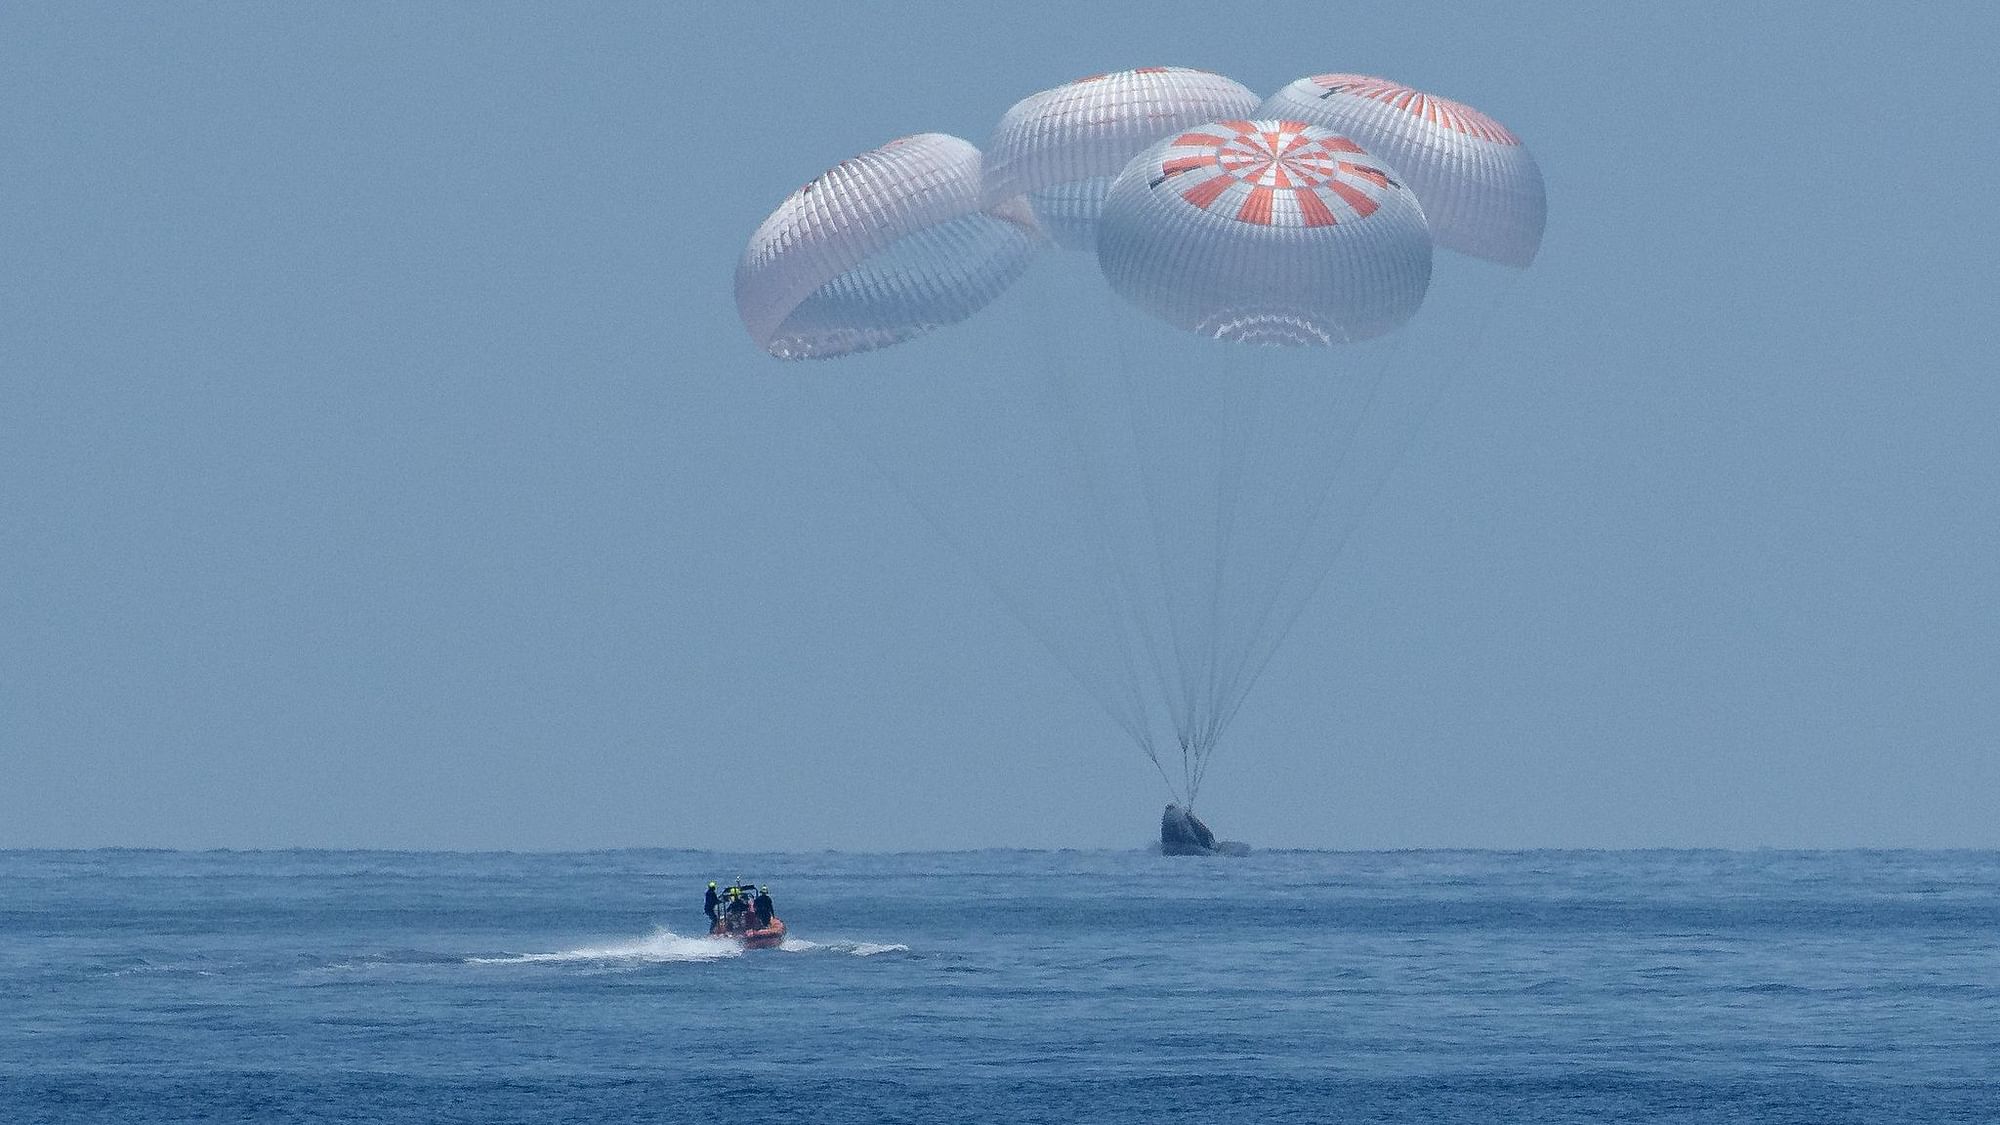 The first American-crewed spaceship to fly to the International Space Station in almost a decade, returned safely back to Earth on Sunday, 2 August.